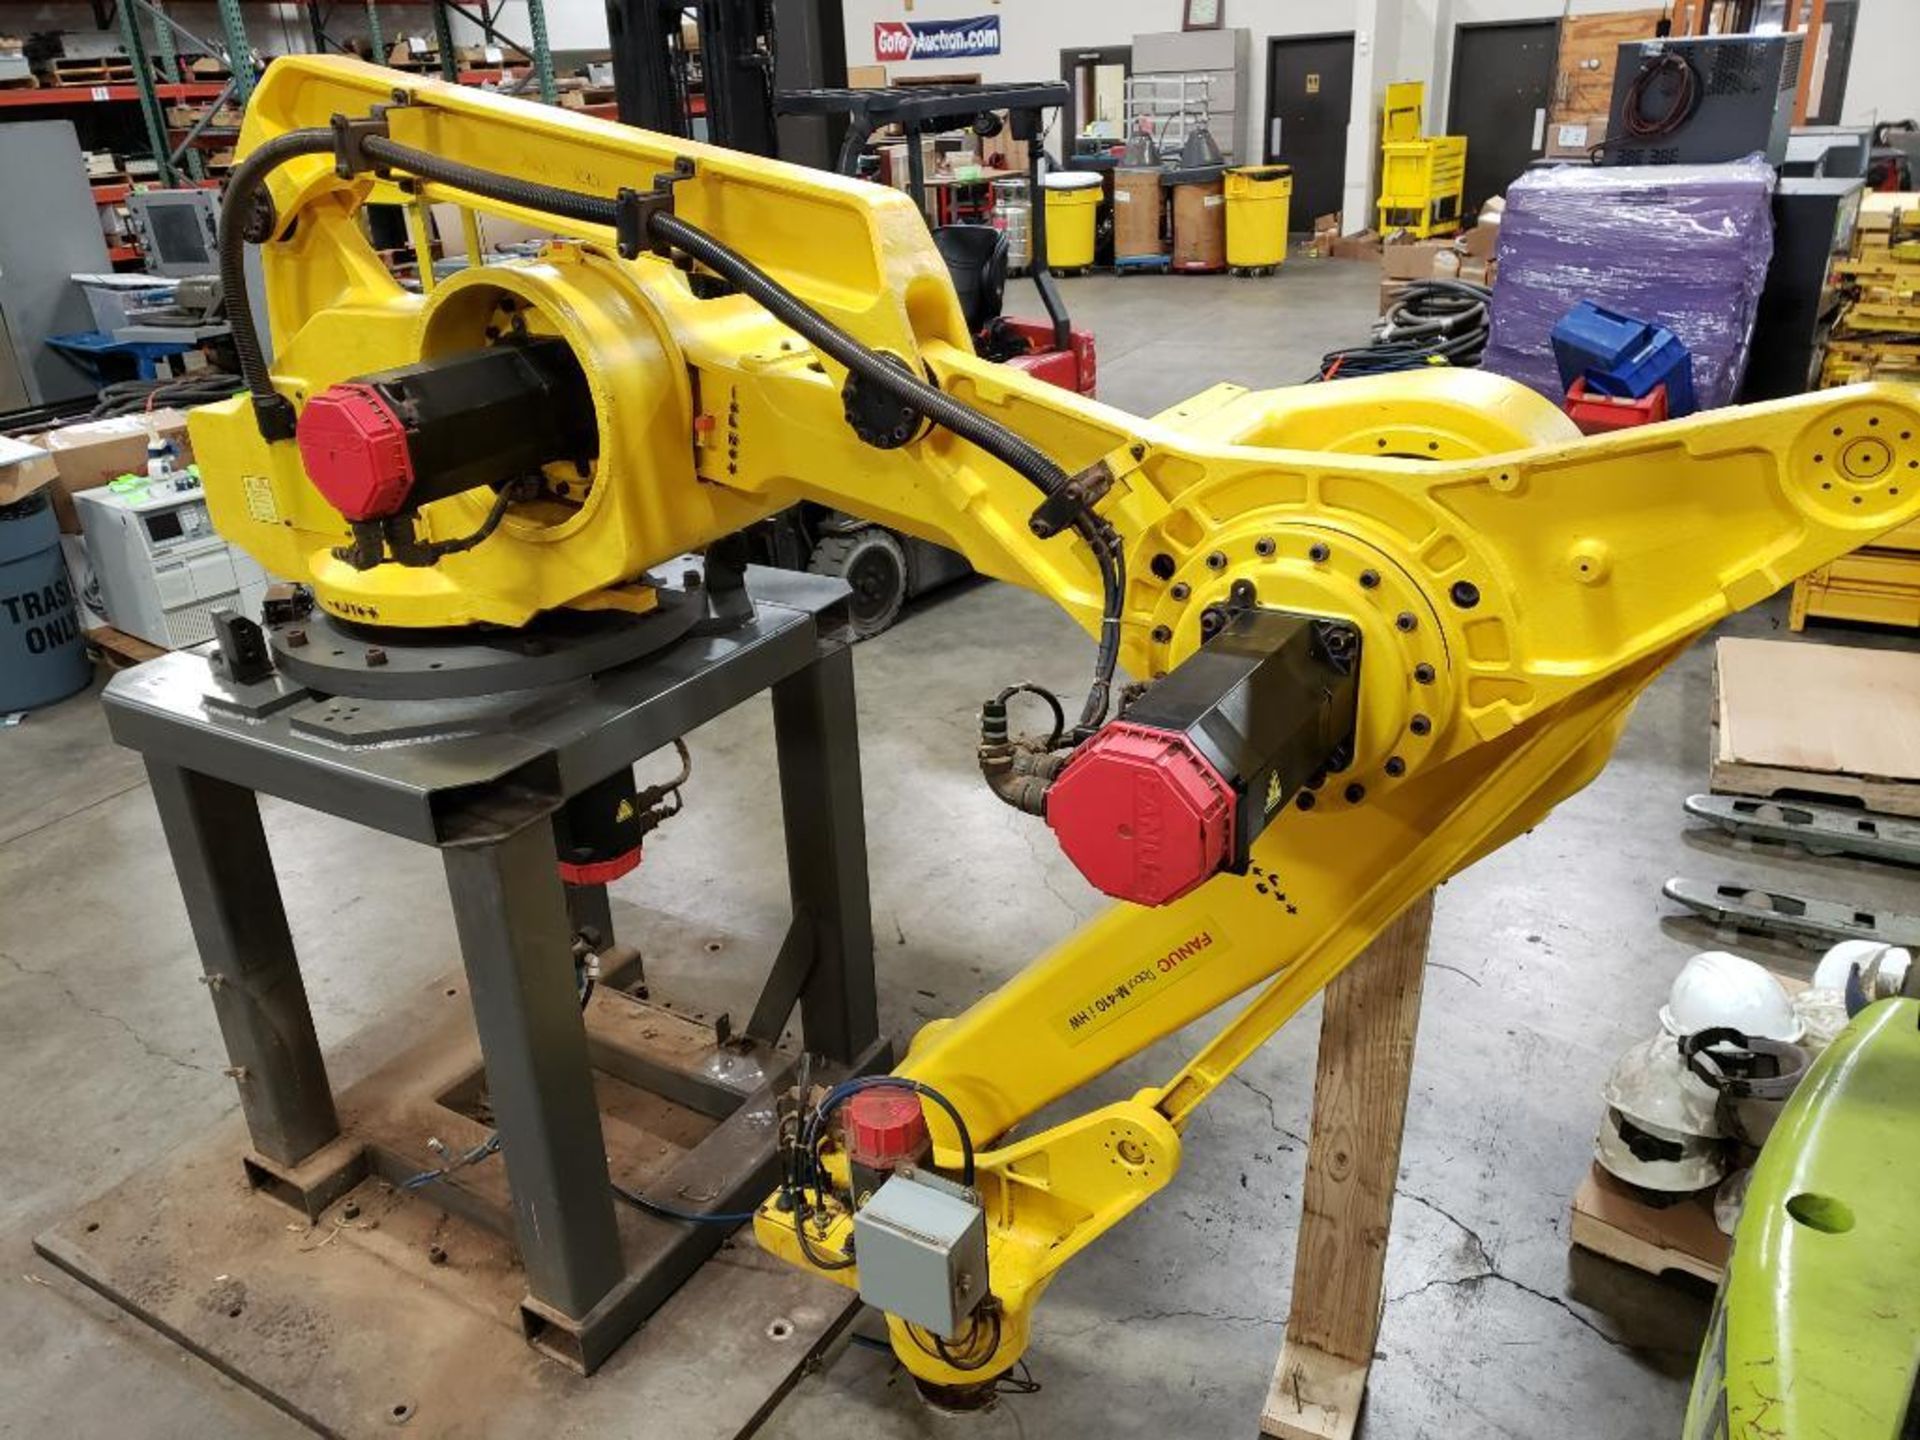 Fanuc M-410i HW robot arm. Does not include controller or cables. (cables have been cut) - Image 7 of 27